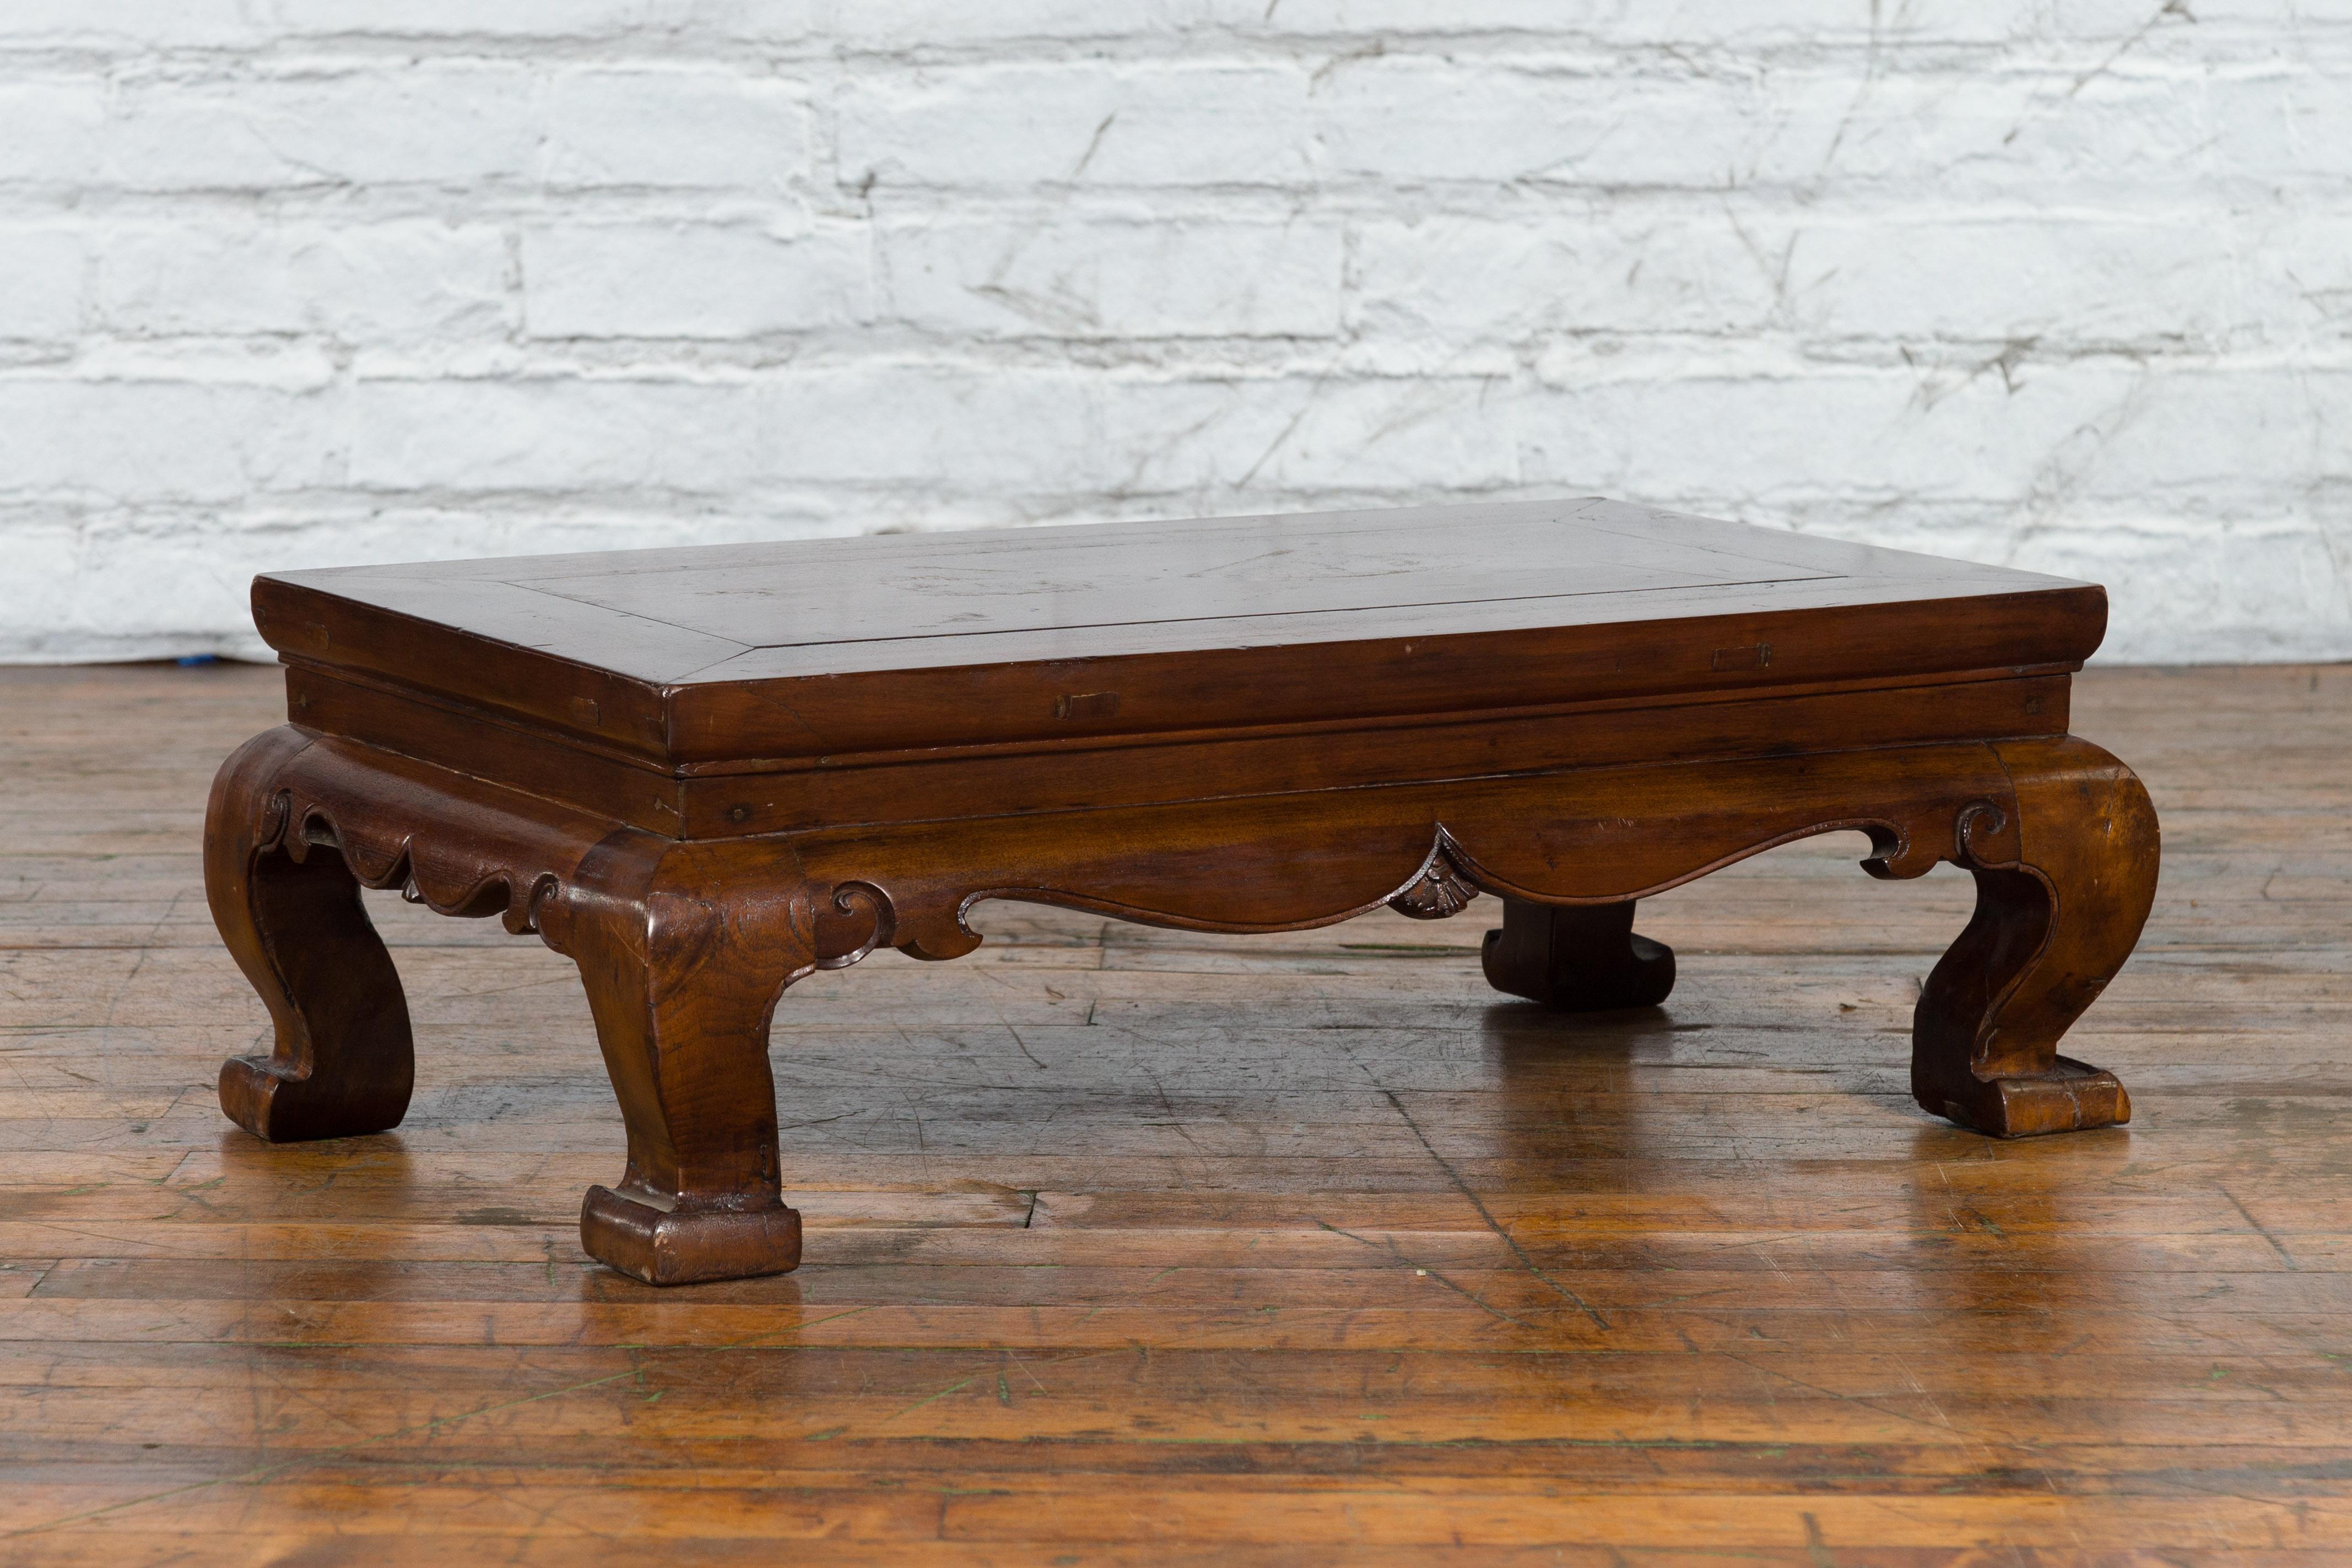 A small Chinese Qing Dynasty period coffee table from the 19th century, with chow leg design and carved apron. Created in China during the Qing Dynasty, this small coffee table features a rectangular top with central board, sitting above a carved